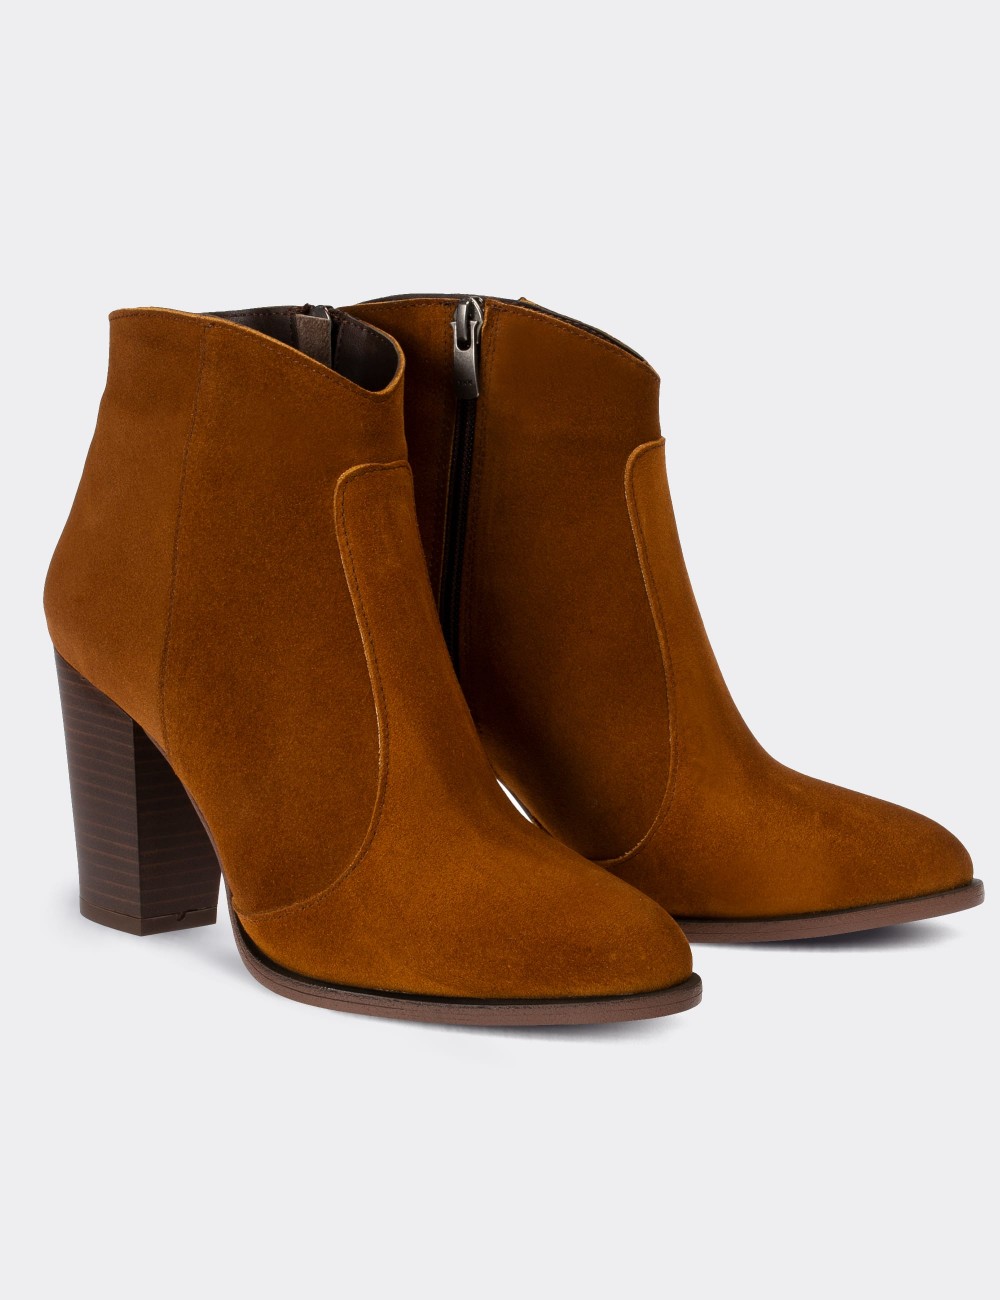 Tan Suede Leather  Boots - E4459ZTBAC01